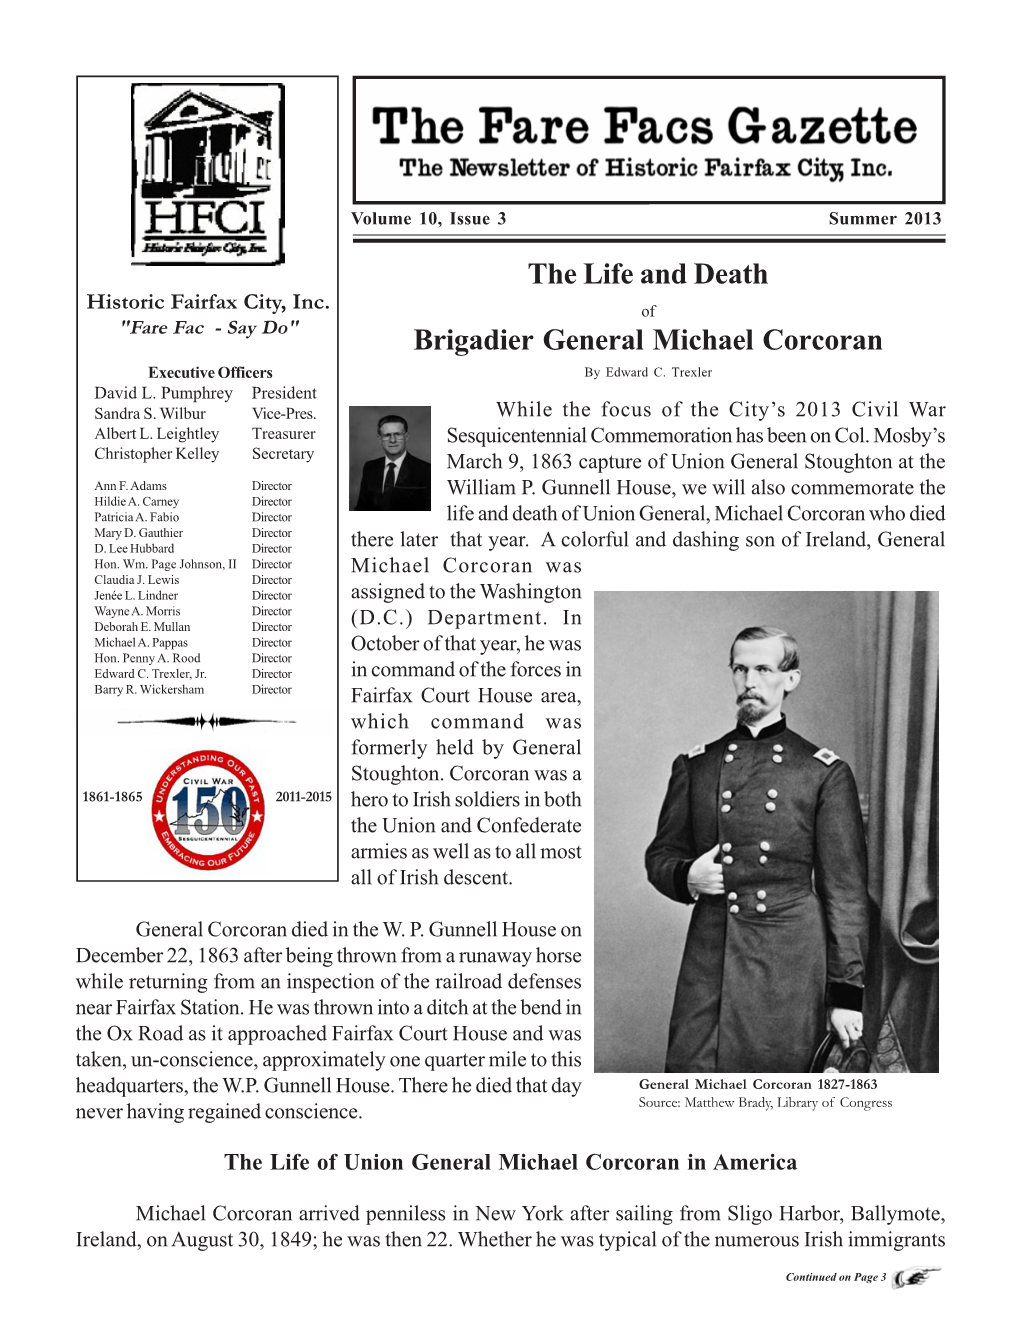 The Life and Death Brigadier General Michael Corcoran